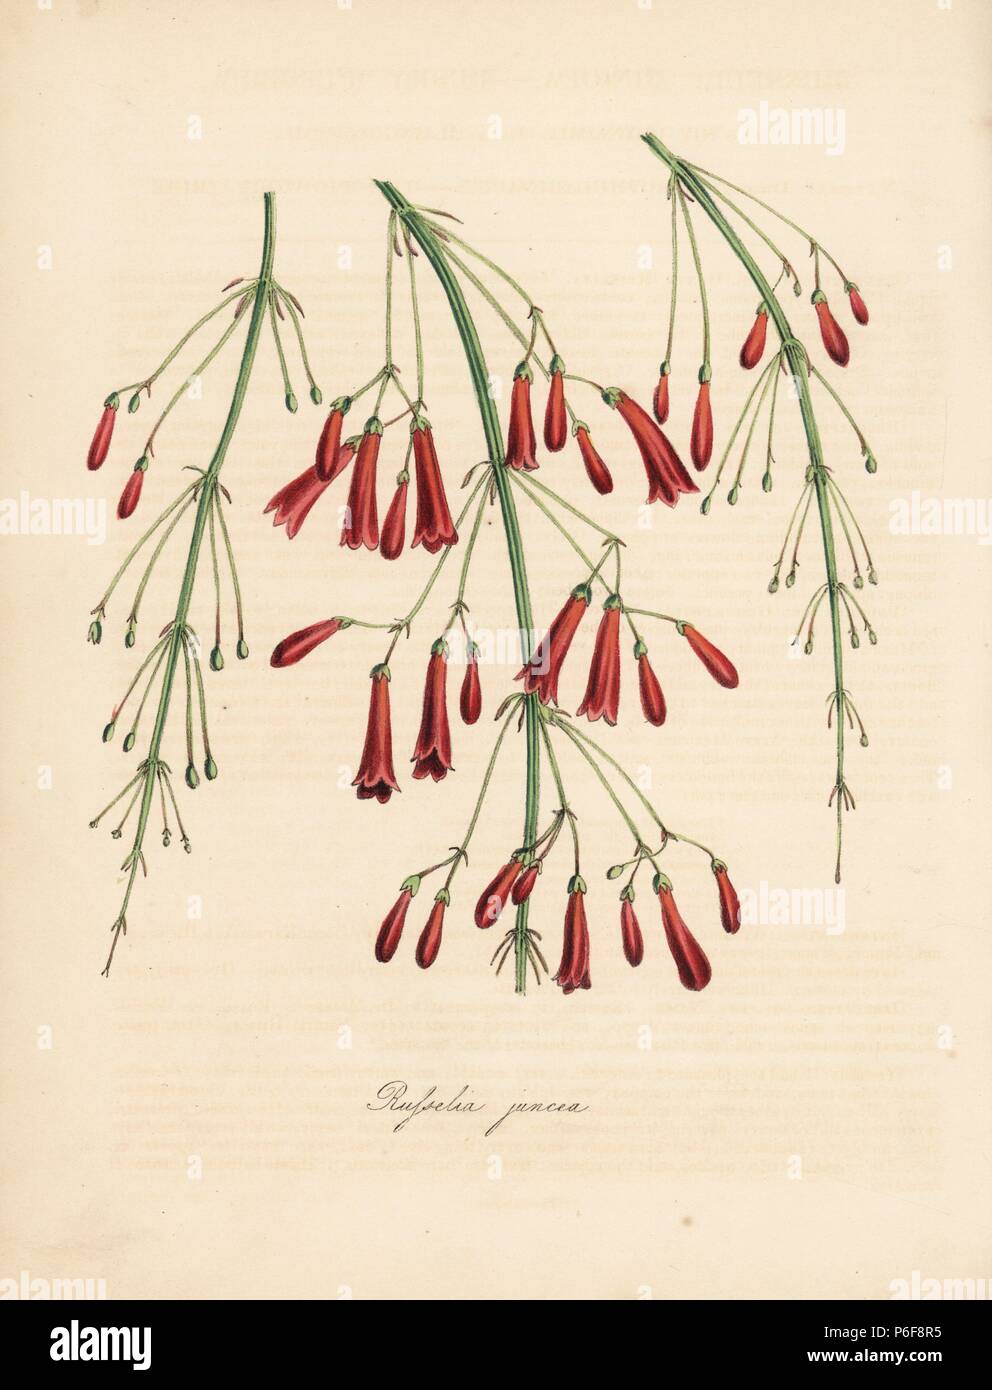 Firecracker plant, Russelia equisetiformis (Russelia juncea). Based on Mrs Augusta Withers' illustration in Benjamin Maund's 'The Botanist.' Handcoloured zincograph by C. Chabot drawn by Miss M. A. Burnett from her 'Plantae Utiliores: or Illustrations of Useful Plants,' Whittaker, London, 1842. Miss Burnett drew the botanical illustrations, but the text was chiefly by her late brother, British botanist Gilbert Thomas Burnett (1800-1835). Stock Photo